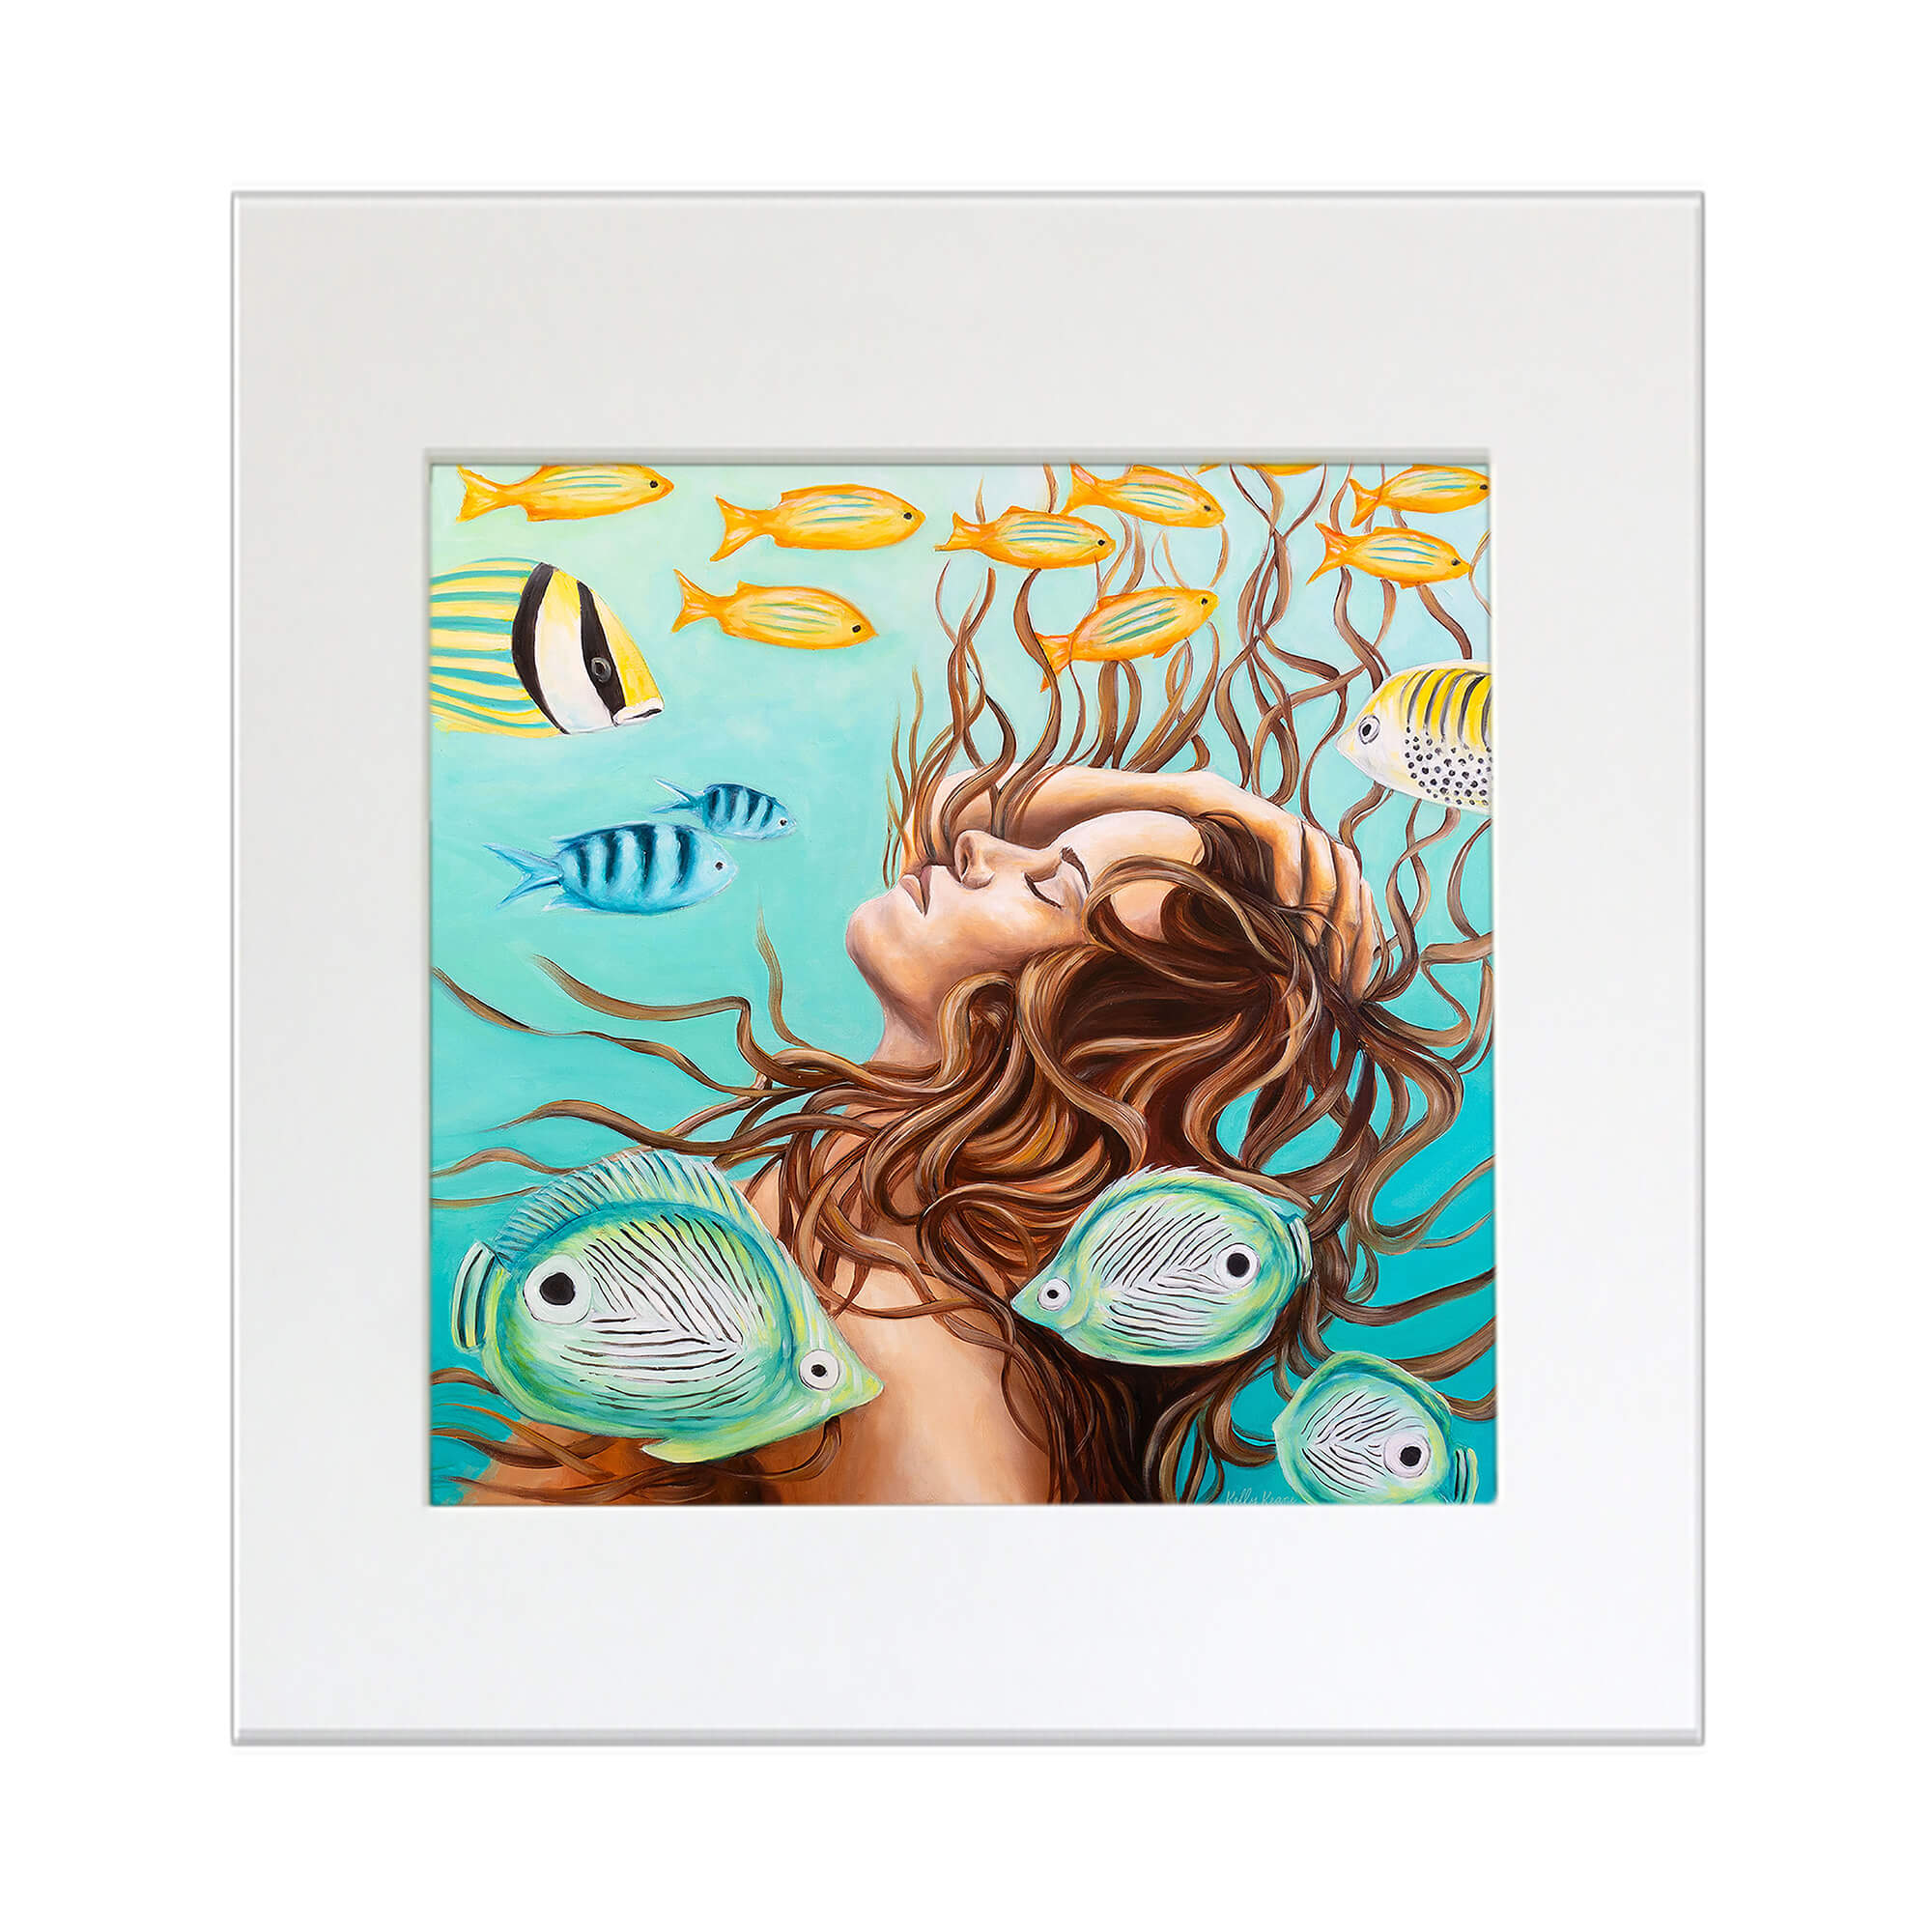 Matted art print of a woman surrounded by some colorful fish by Hawaii artist Kelly Keane 